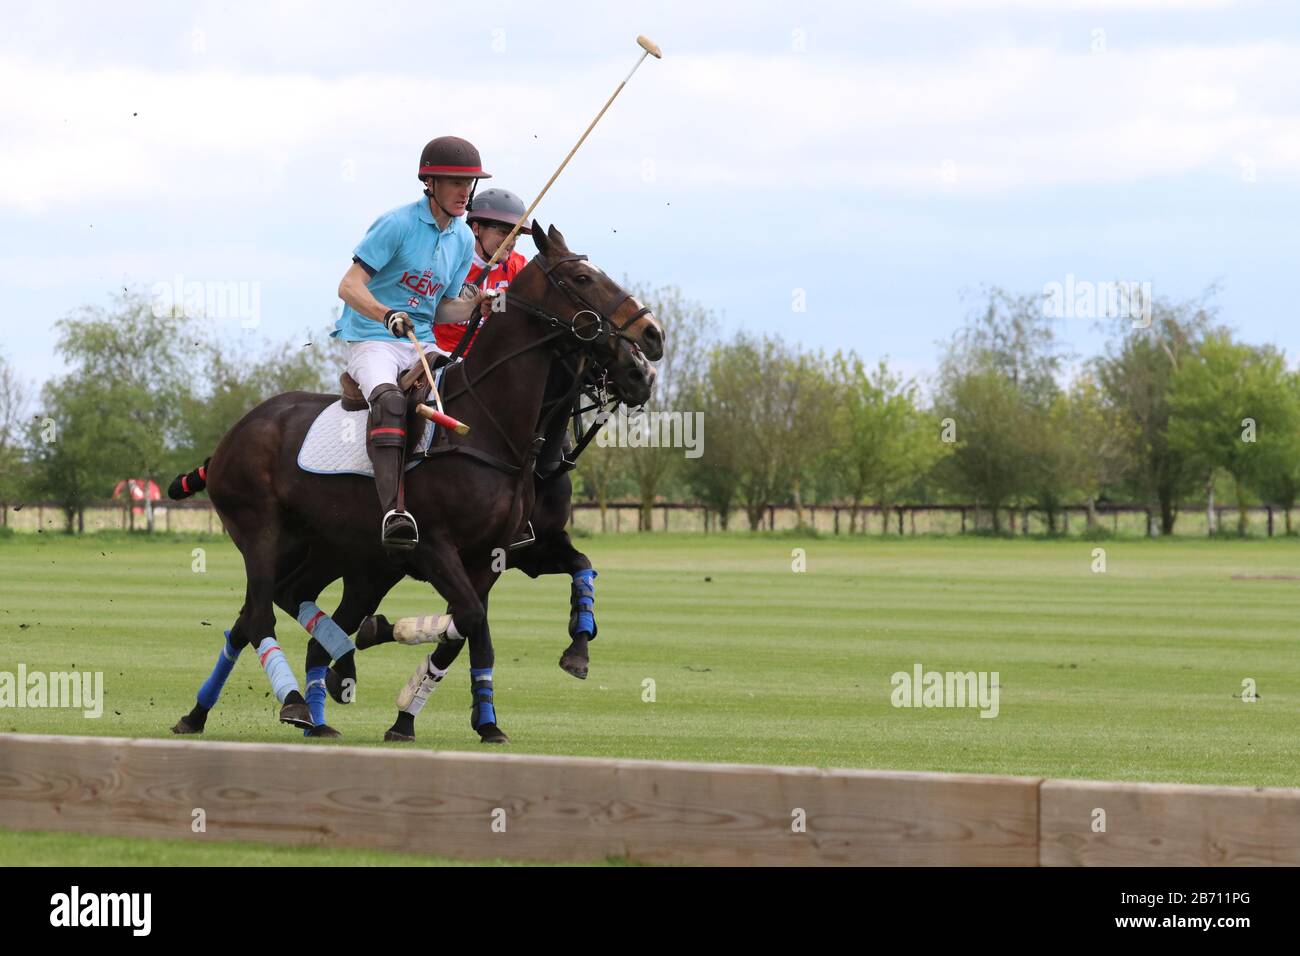 Two players battle it out for the ball during Cambridge Polo tournament Stock Photo